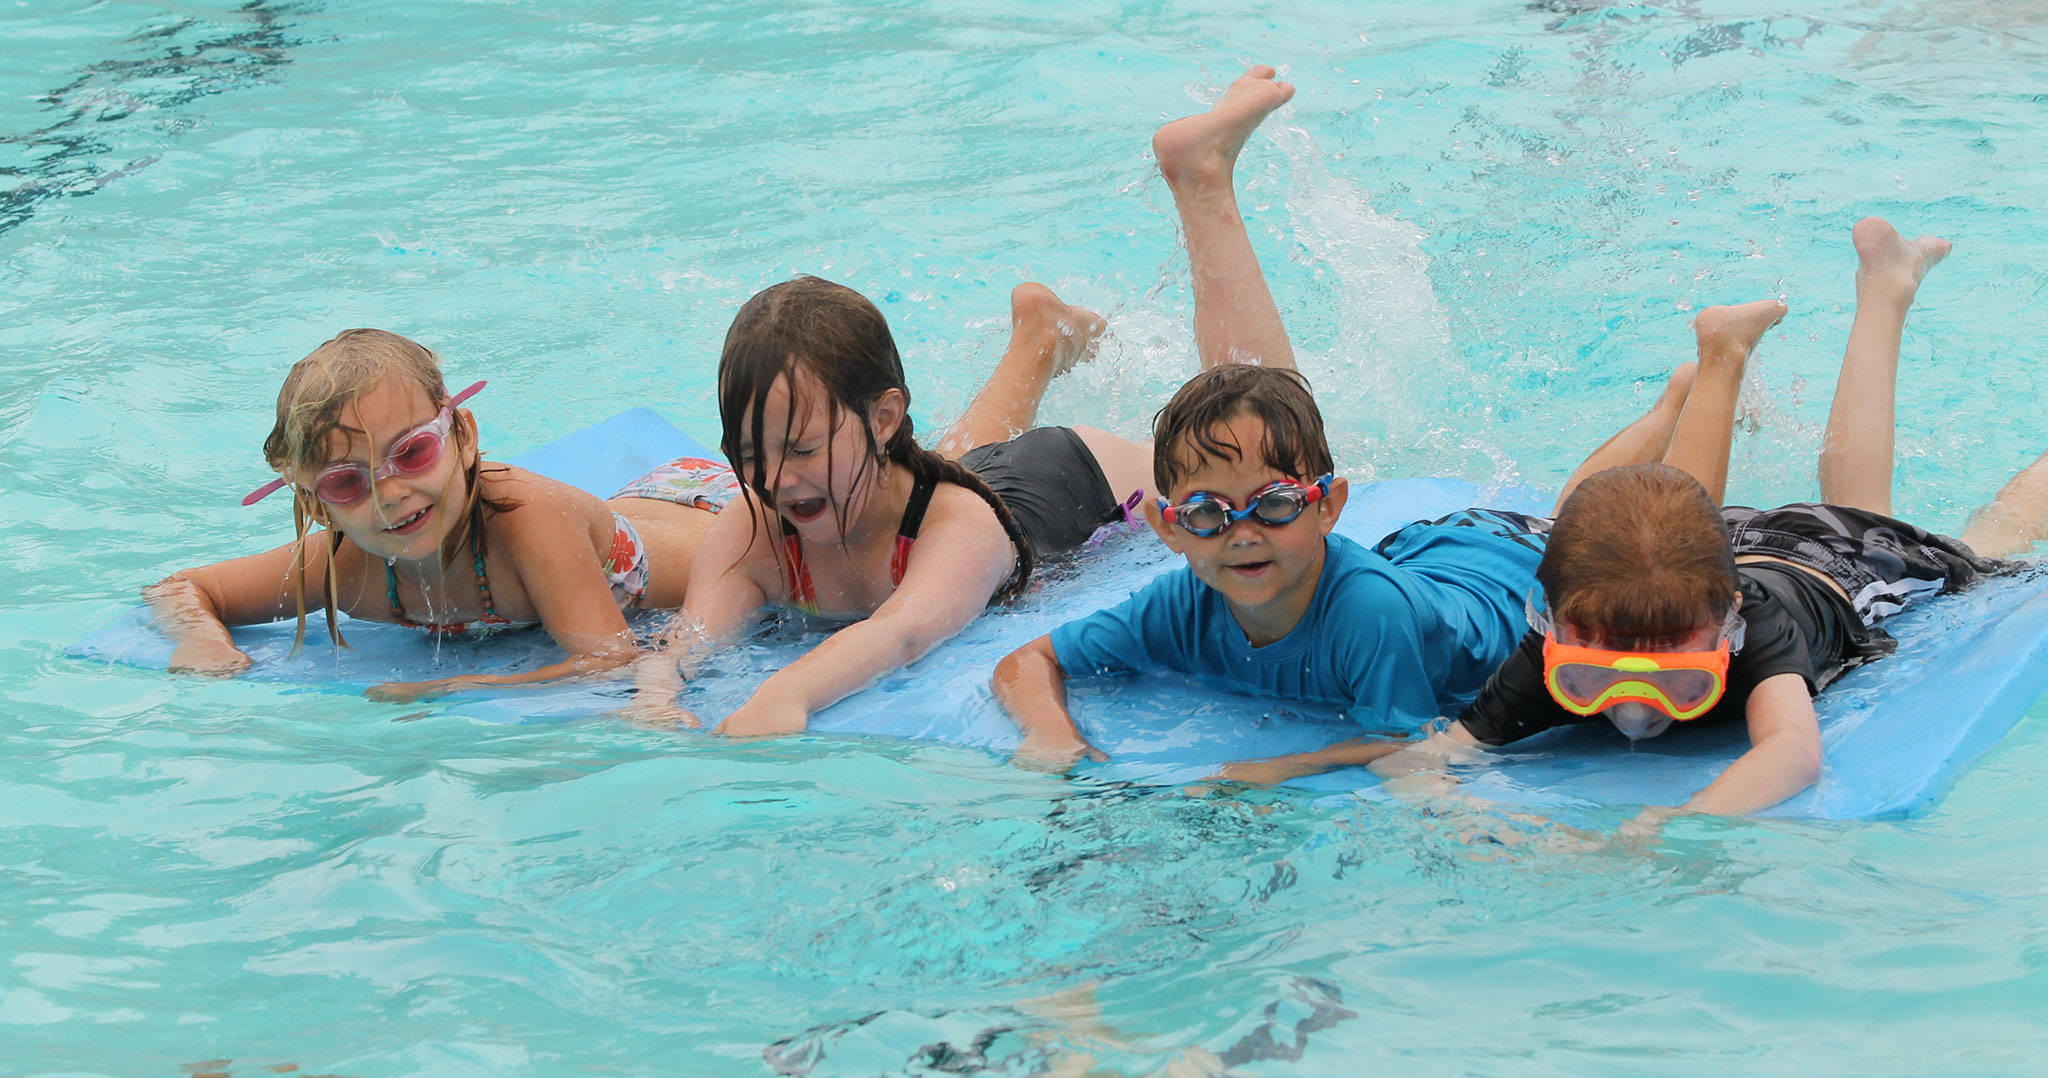 Eleanore Hunsaker, left, Klara Hanson Nikulina, Dreyke Mendiola and Curtis Hastings show a variety of emotions while floating on a foam mat during a swim lesson Thursday. (Photo by Jim Waller/South Whidbey Record)